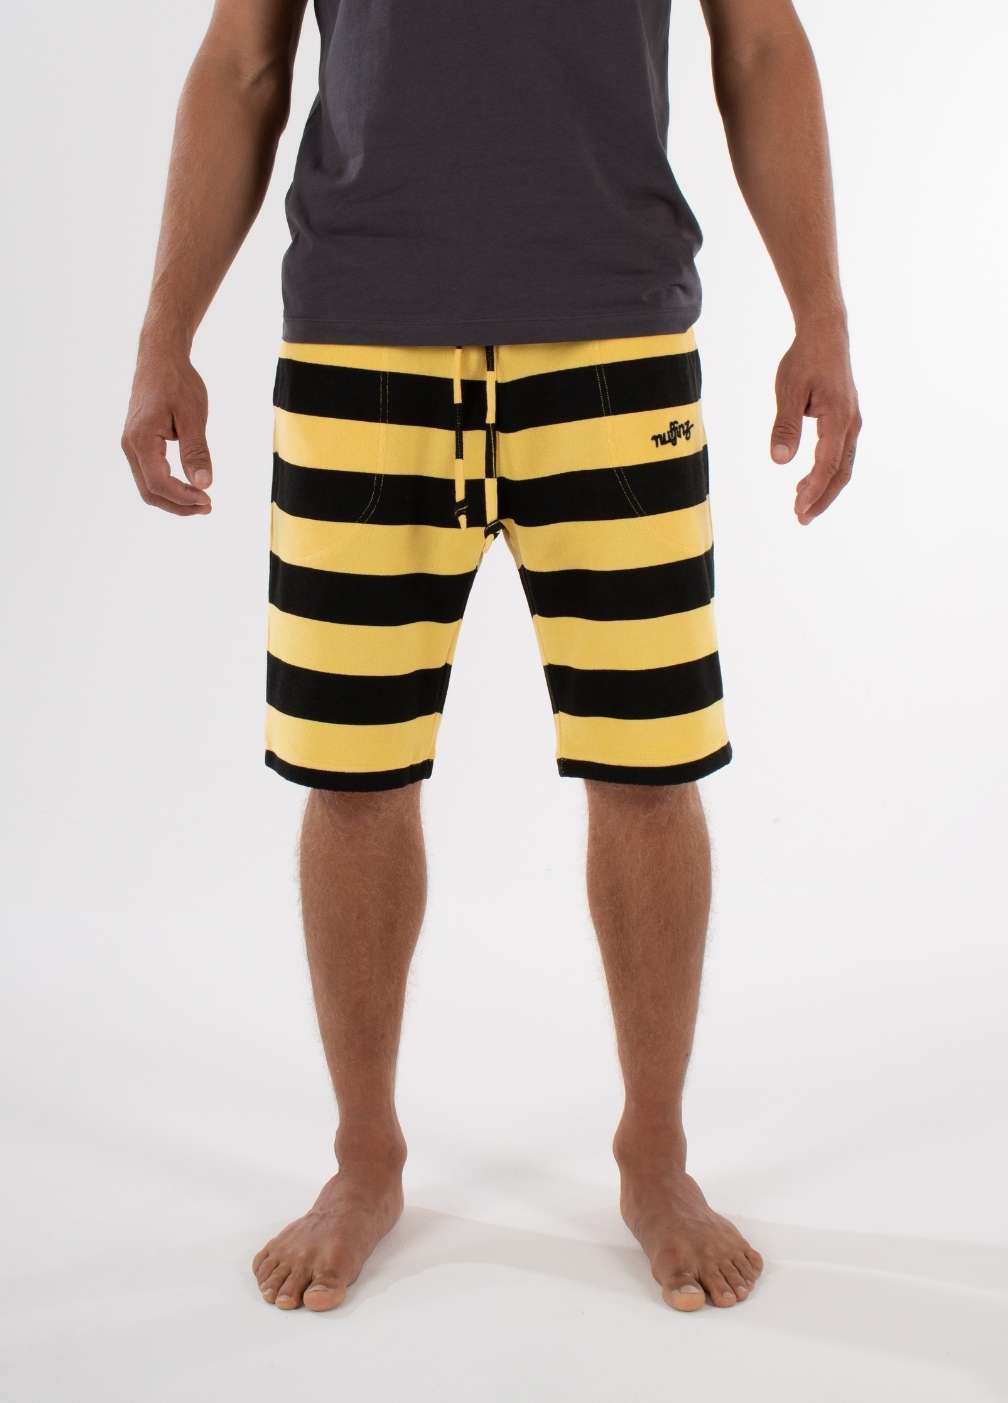 nuffinz striped shorts - YARROW TOWEL SHORTS ST - 100% organic cotton - terry cloth - comfortable shorts for men - closeup front